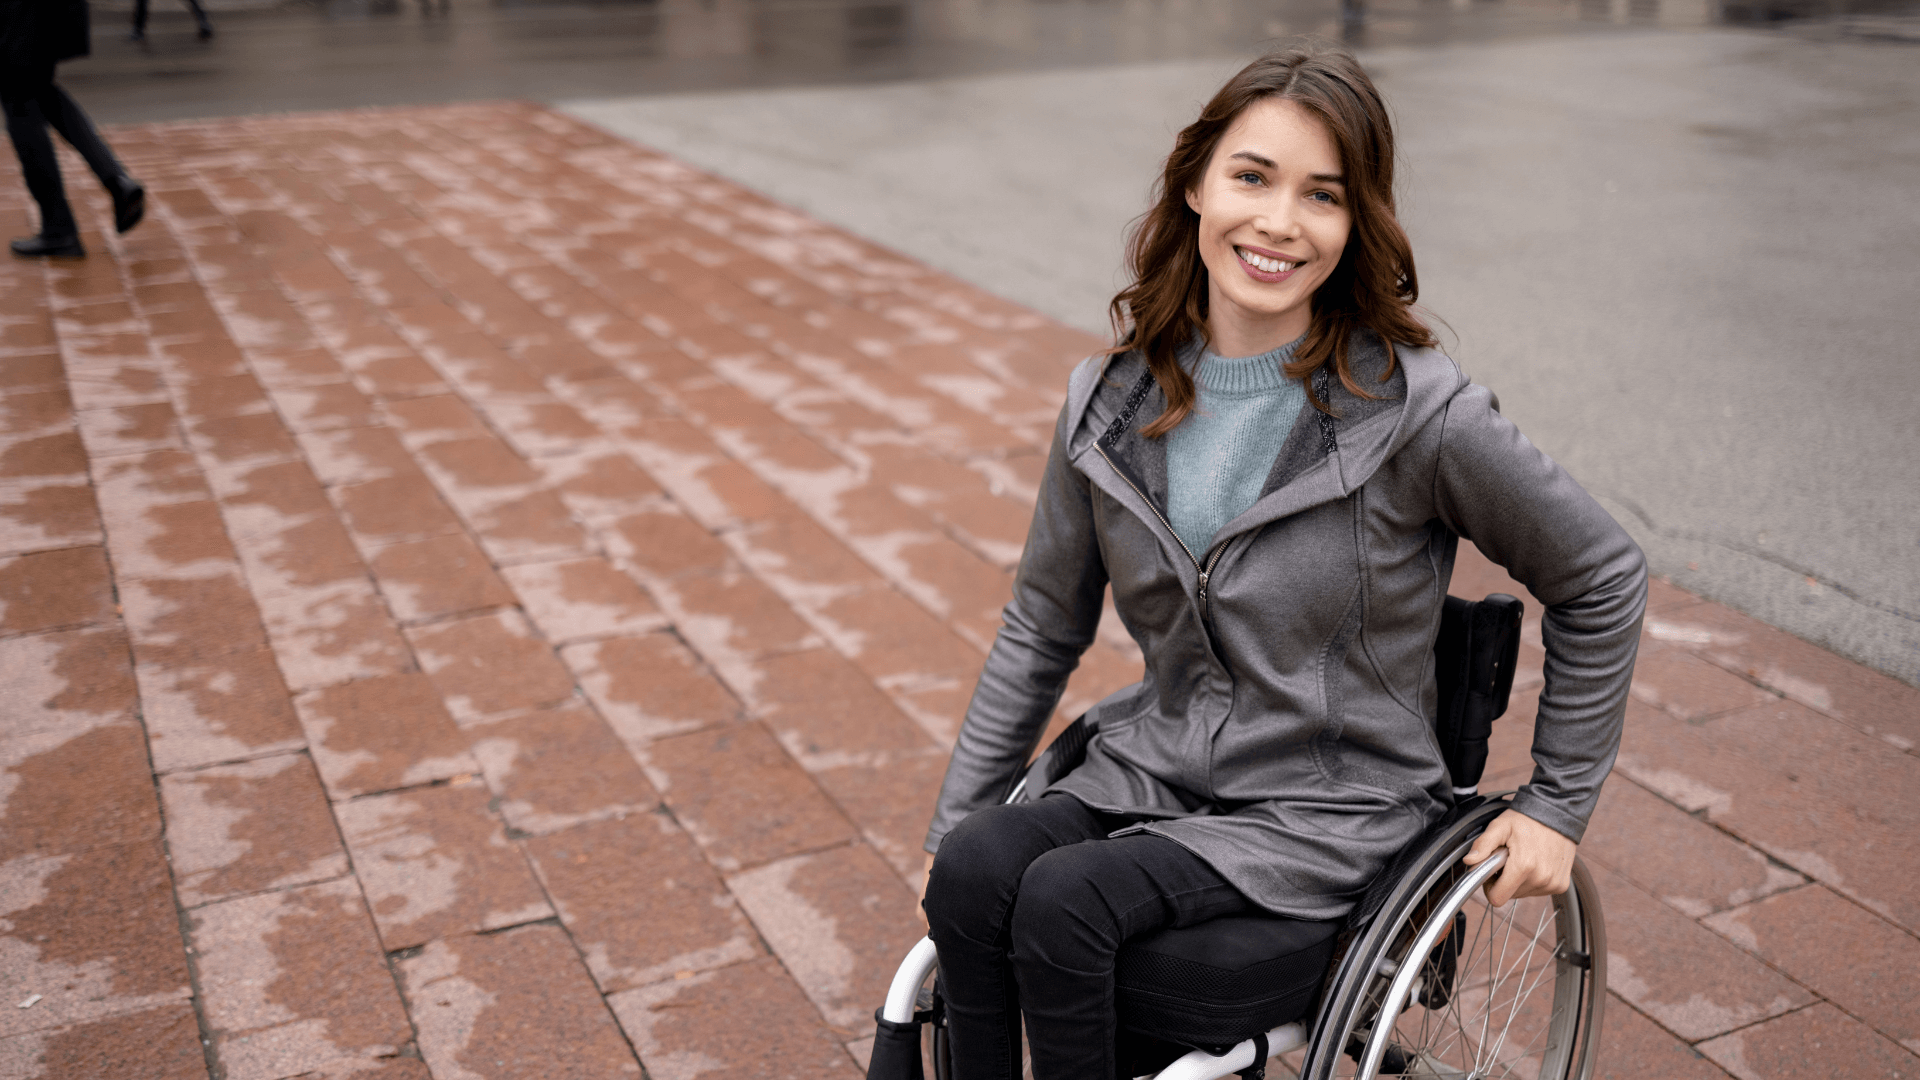 Smiling woman in wheelchair, in urban outdoor space.